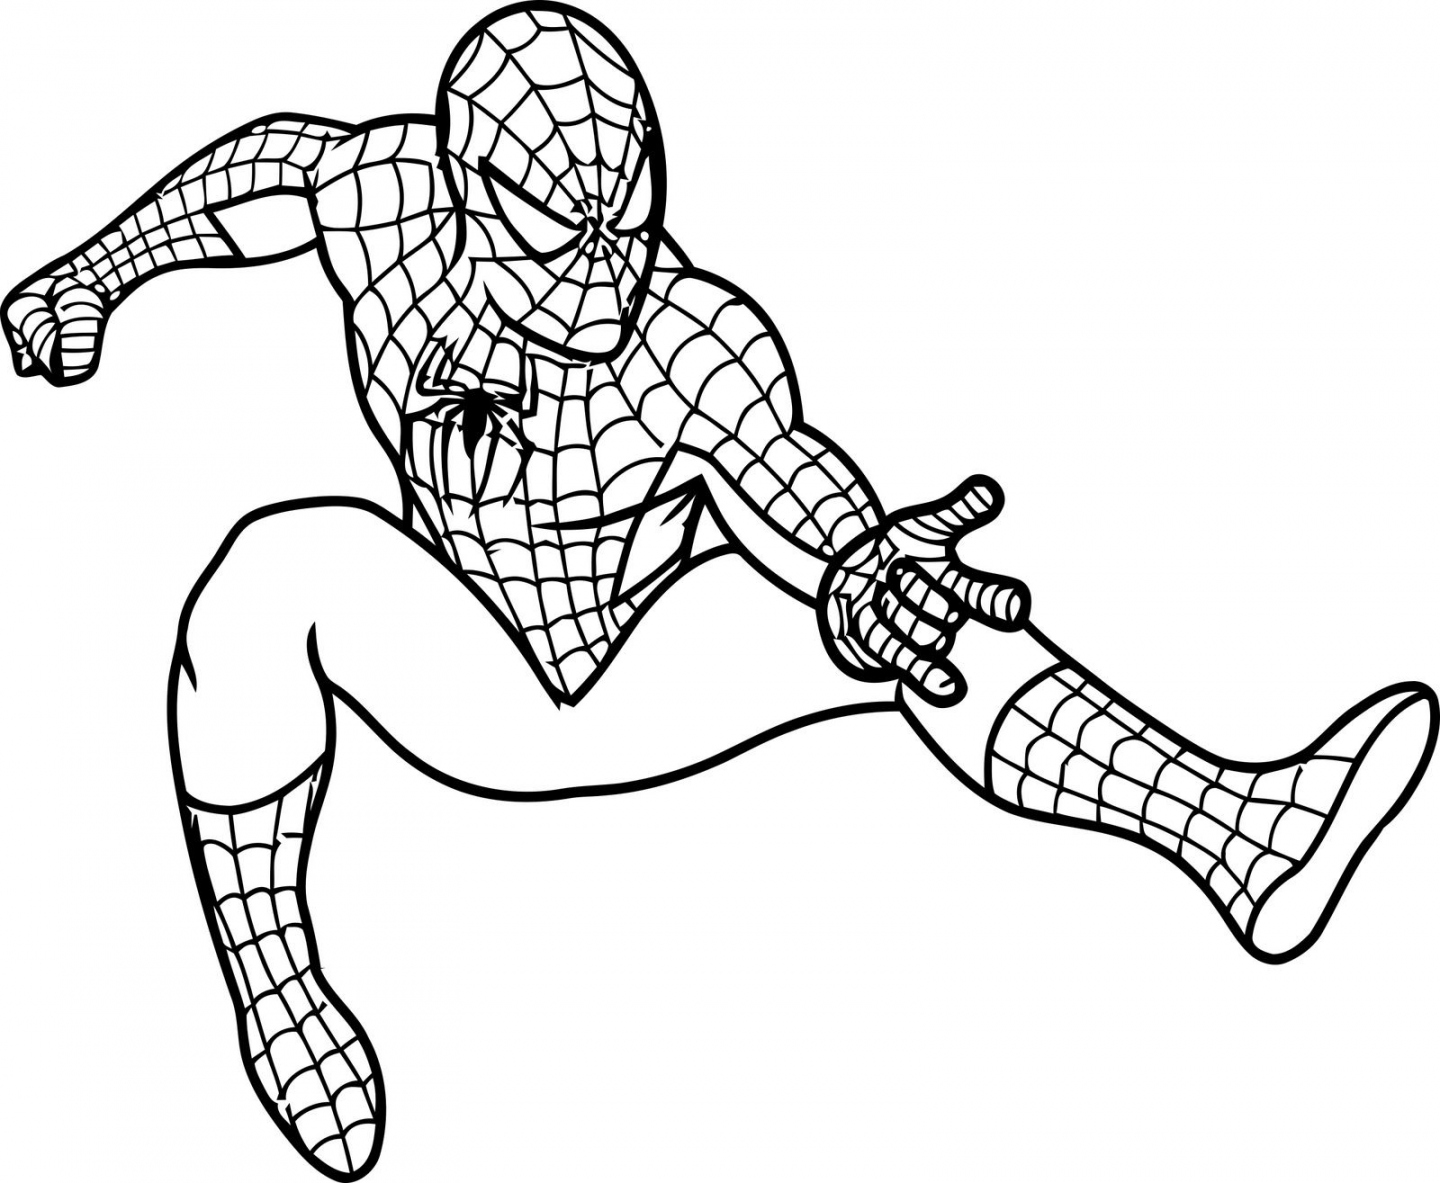 spiderman-free-printable-colouring-pages-free-printable-hq